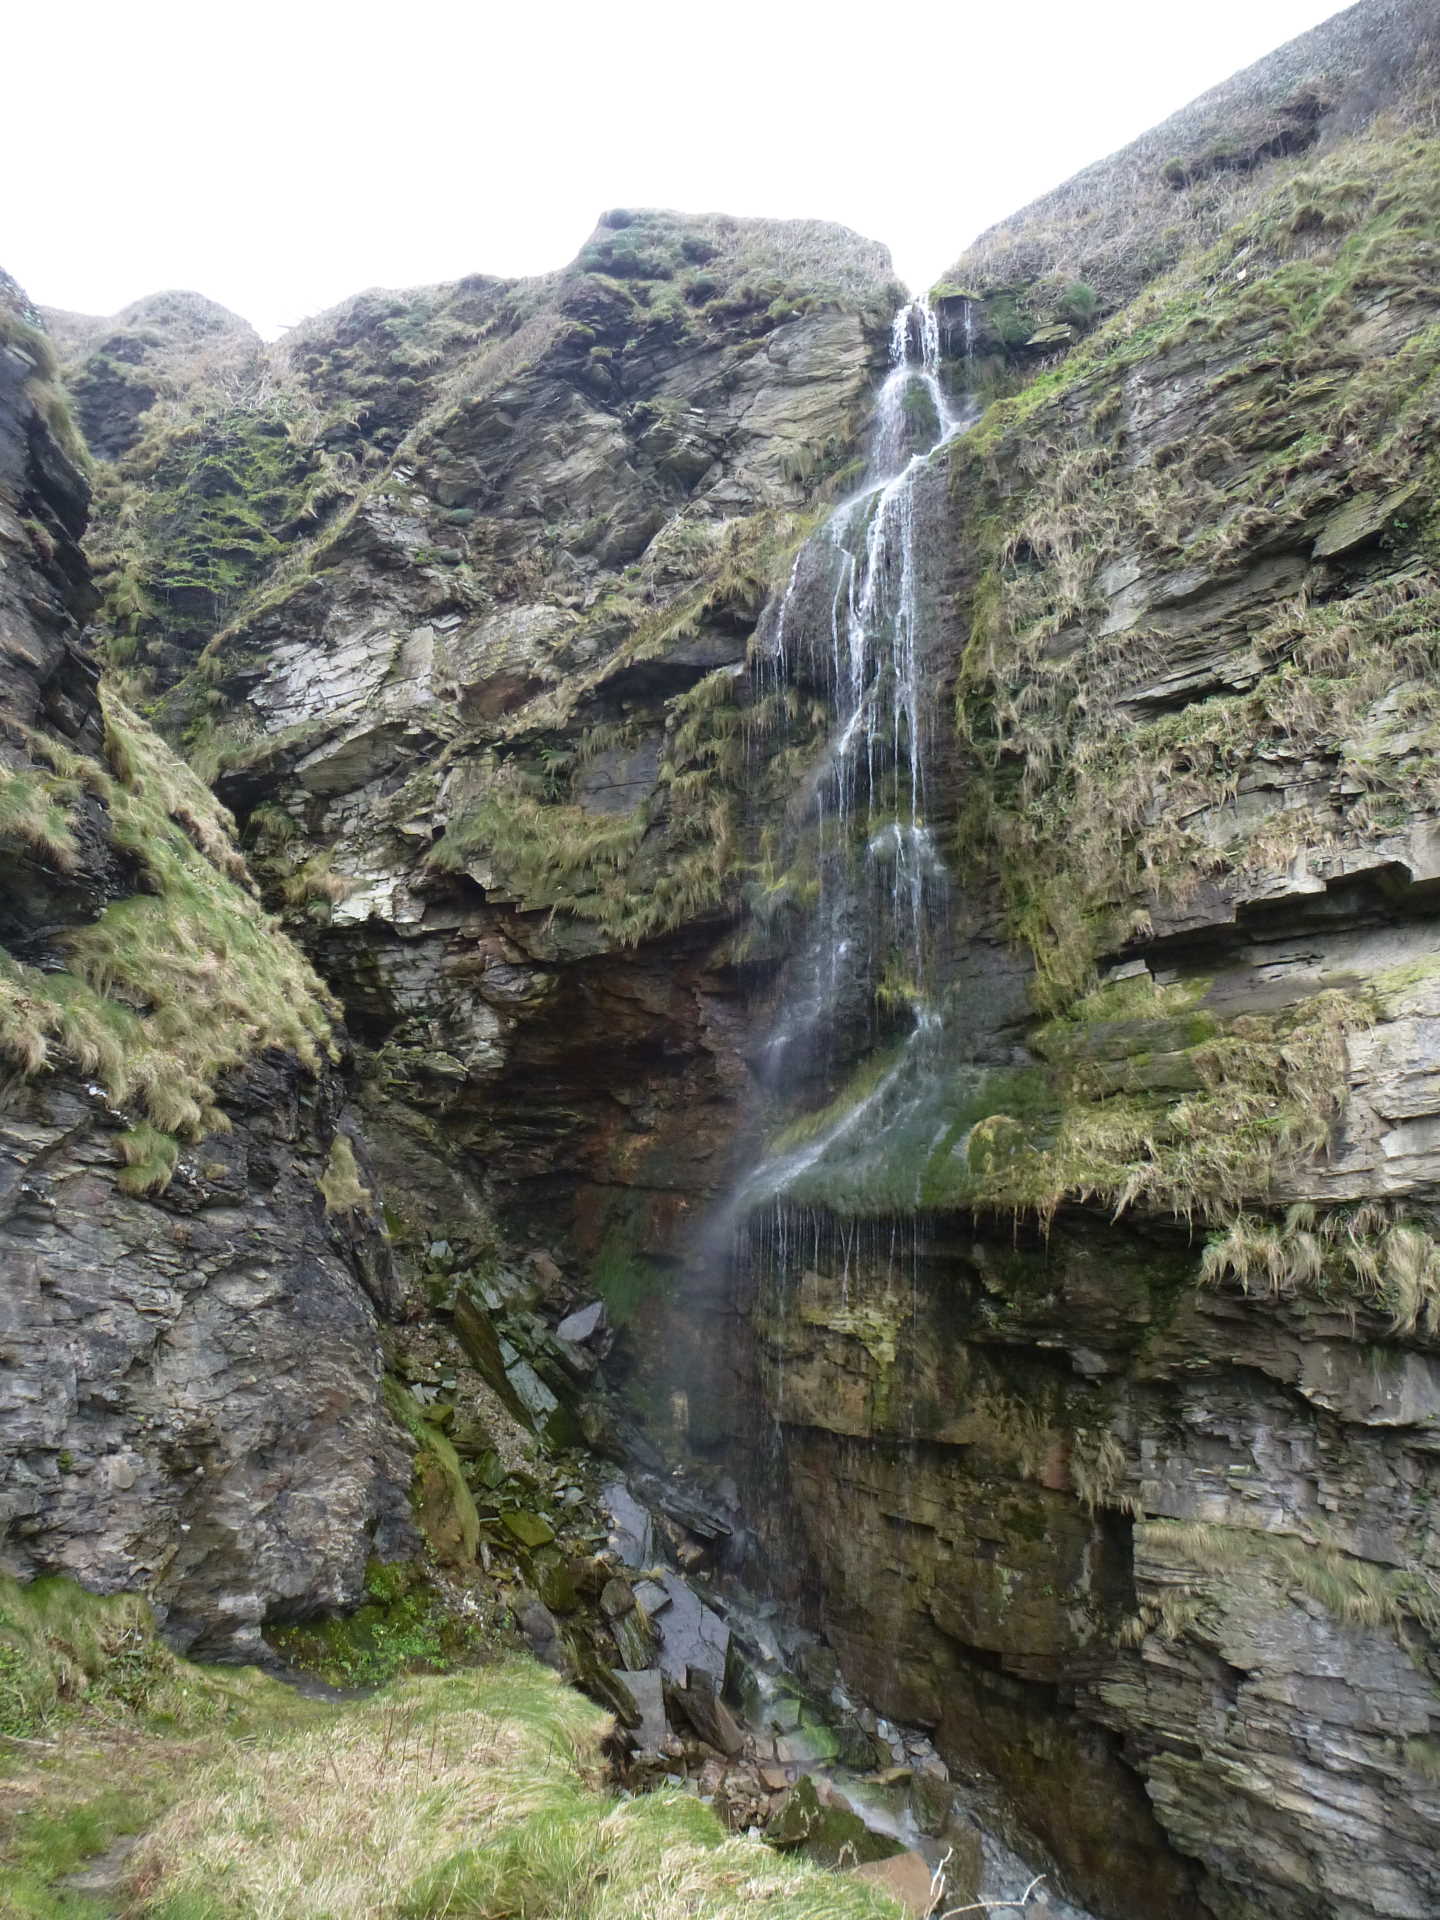 A waterfall on the rock face